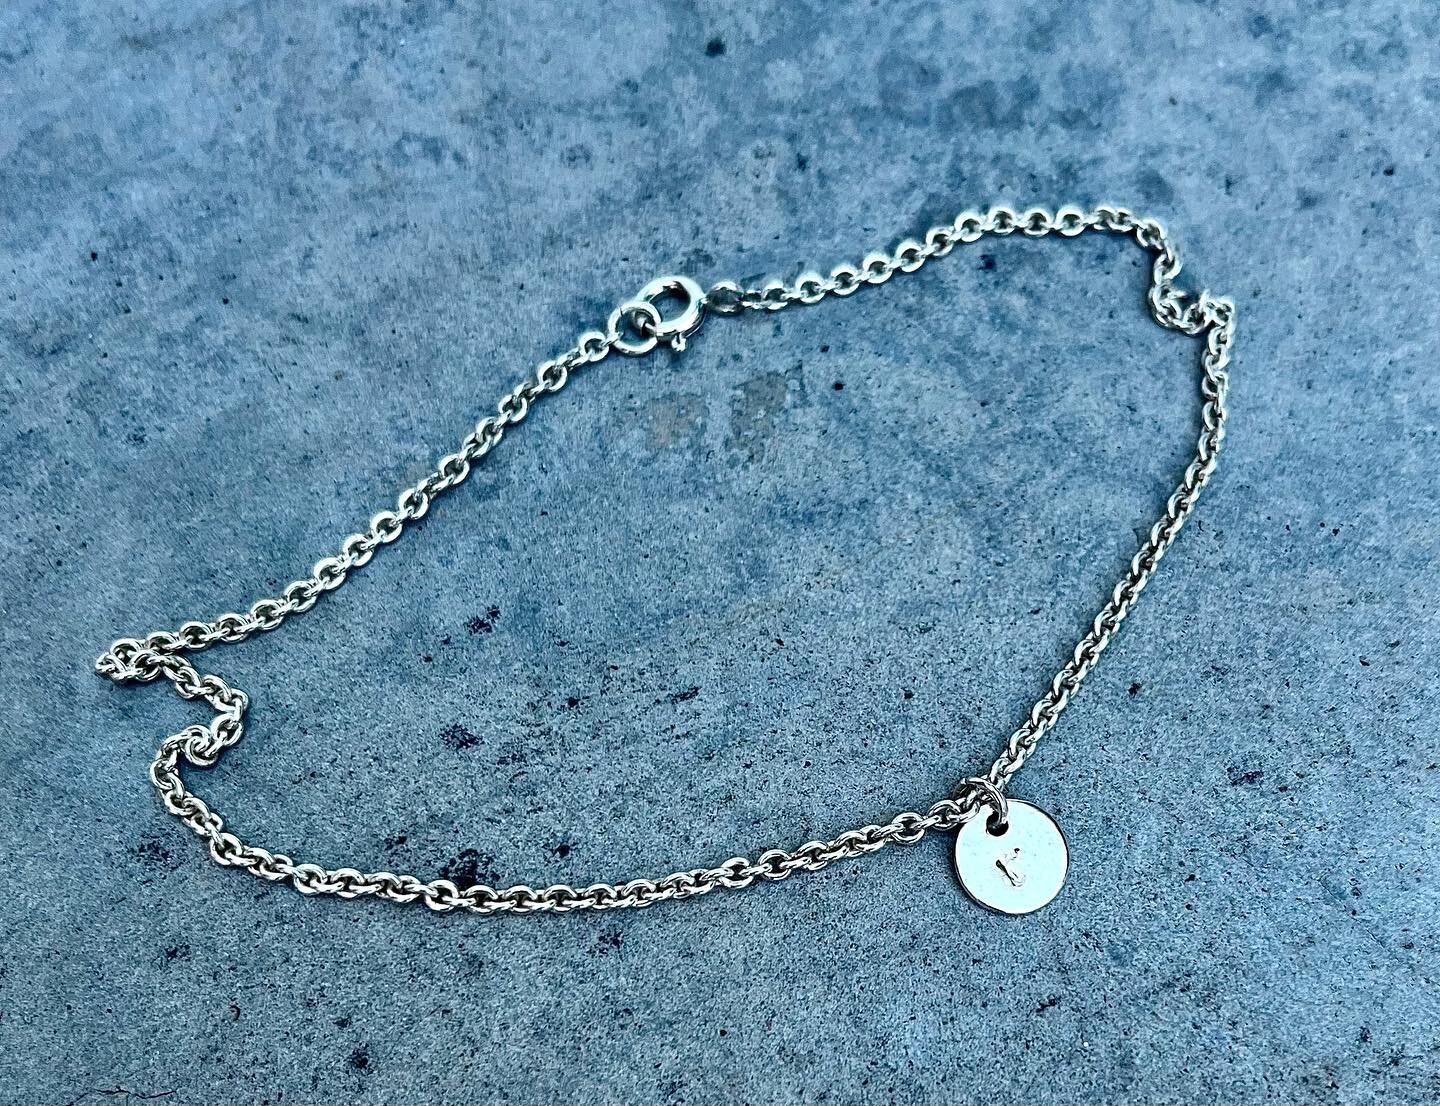 I forgot to post this when I made it for Rachel recently. She asked me for an anklet with a little letter-stamped disk so this is what I made for her. 

I think she liked it - &lsquo;Absolutely adore the anklet ❤️ Fits perfectly and I love the tiny r